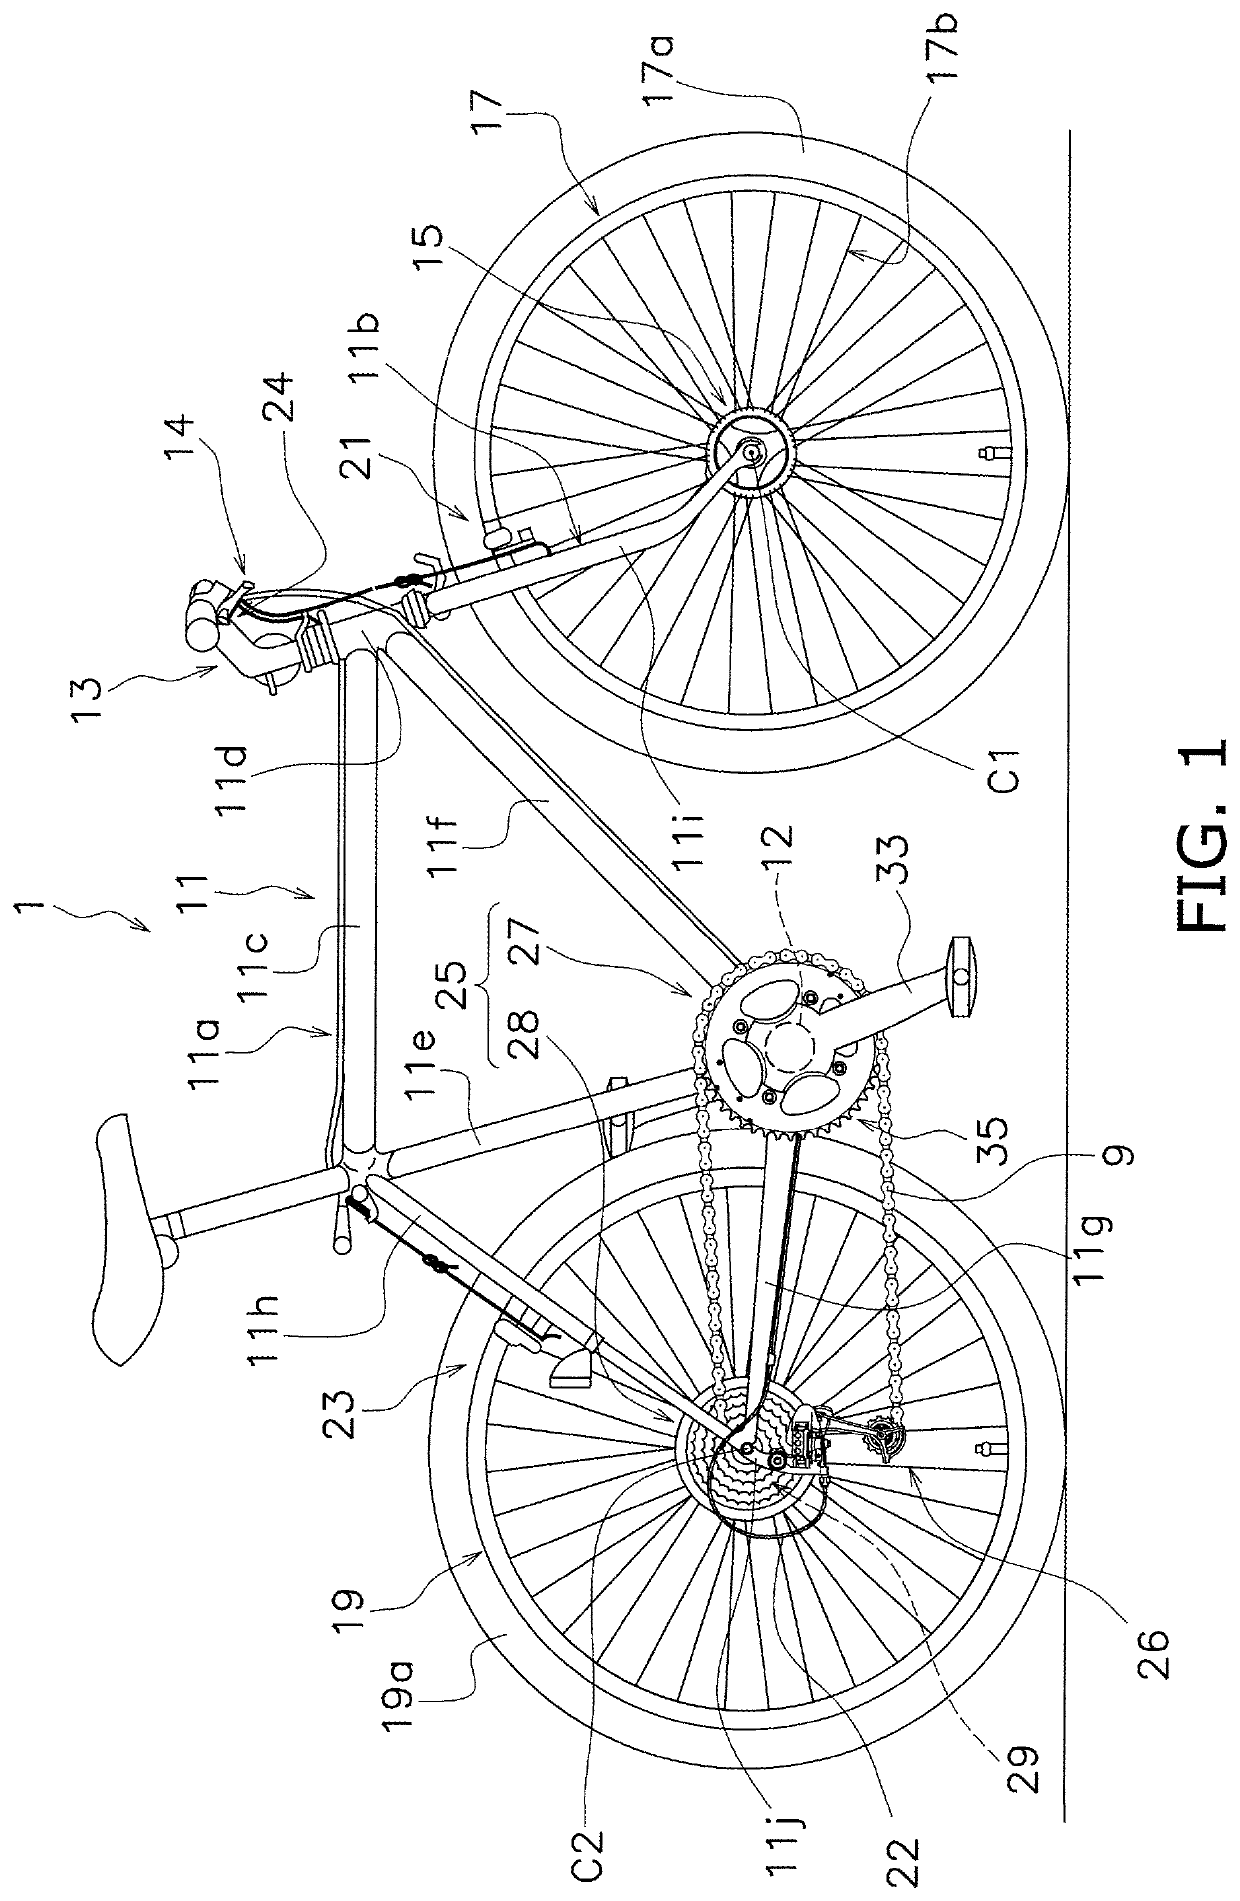 Bicycle hub assembly